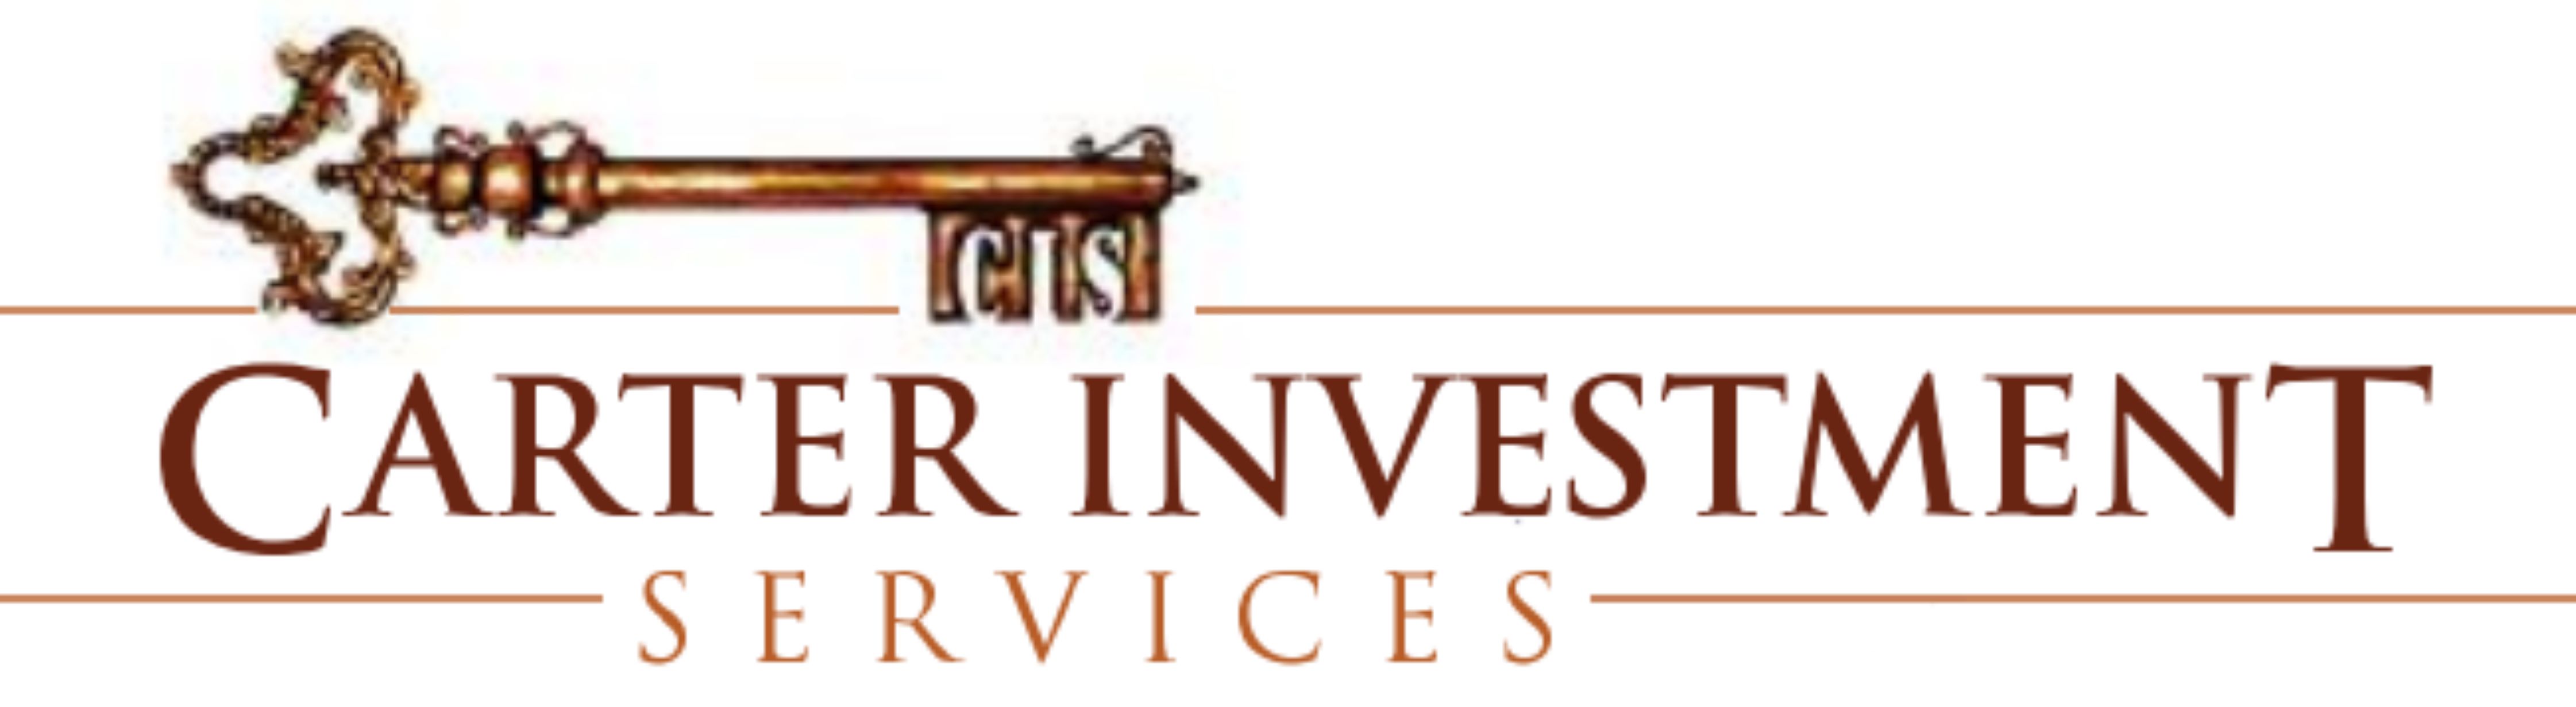 Carter Investment Services